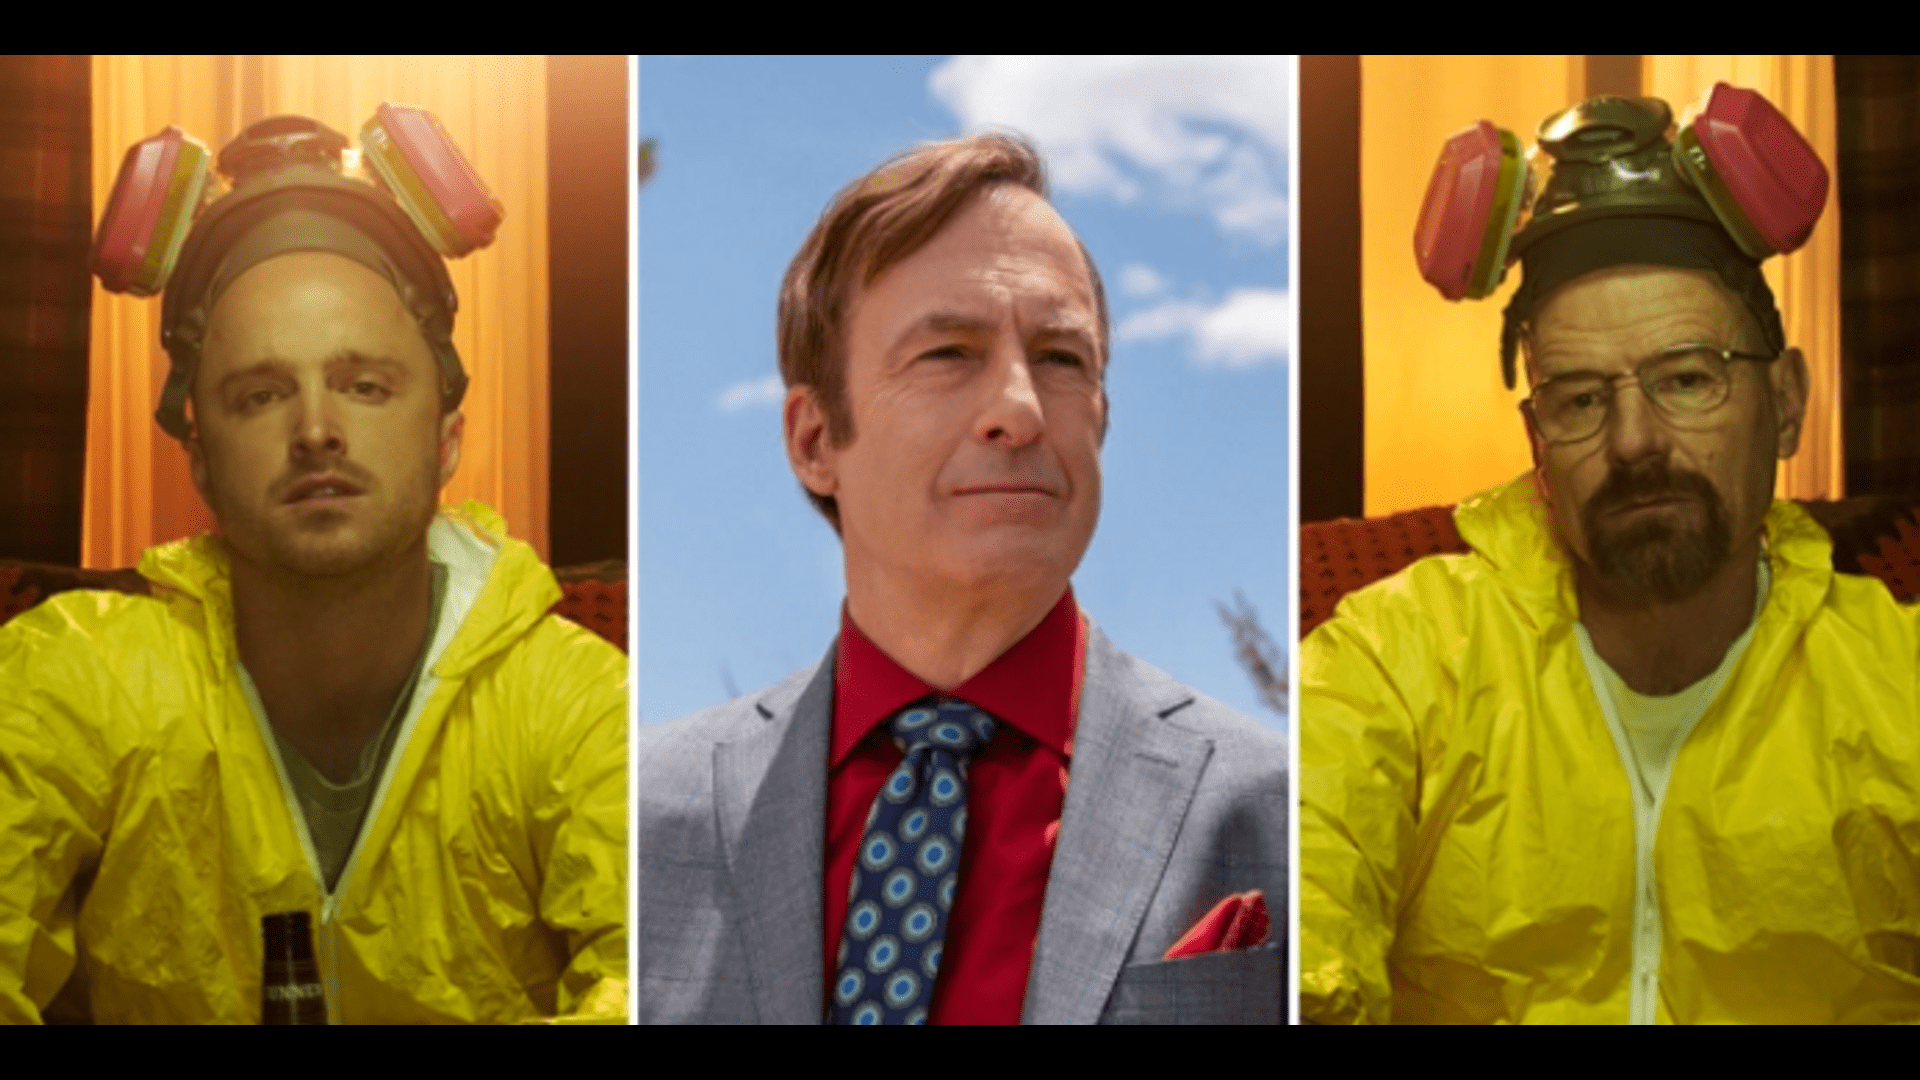 Bryan Cranston and Aaron Paul to appear in Better Call Saul finale